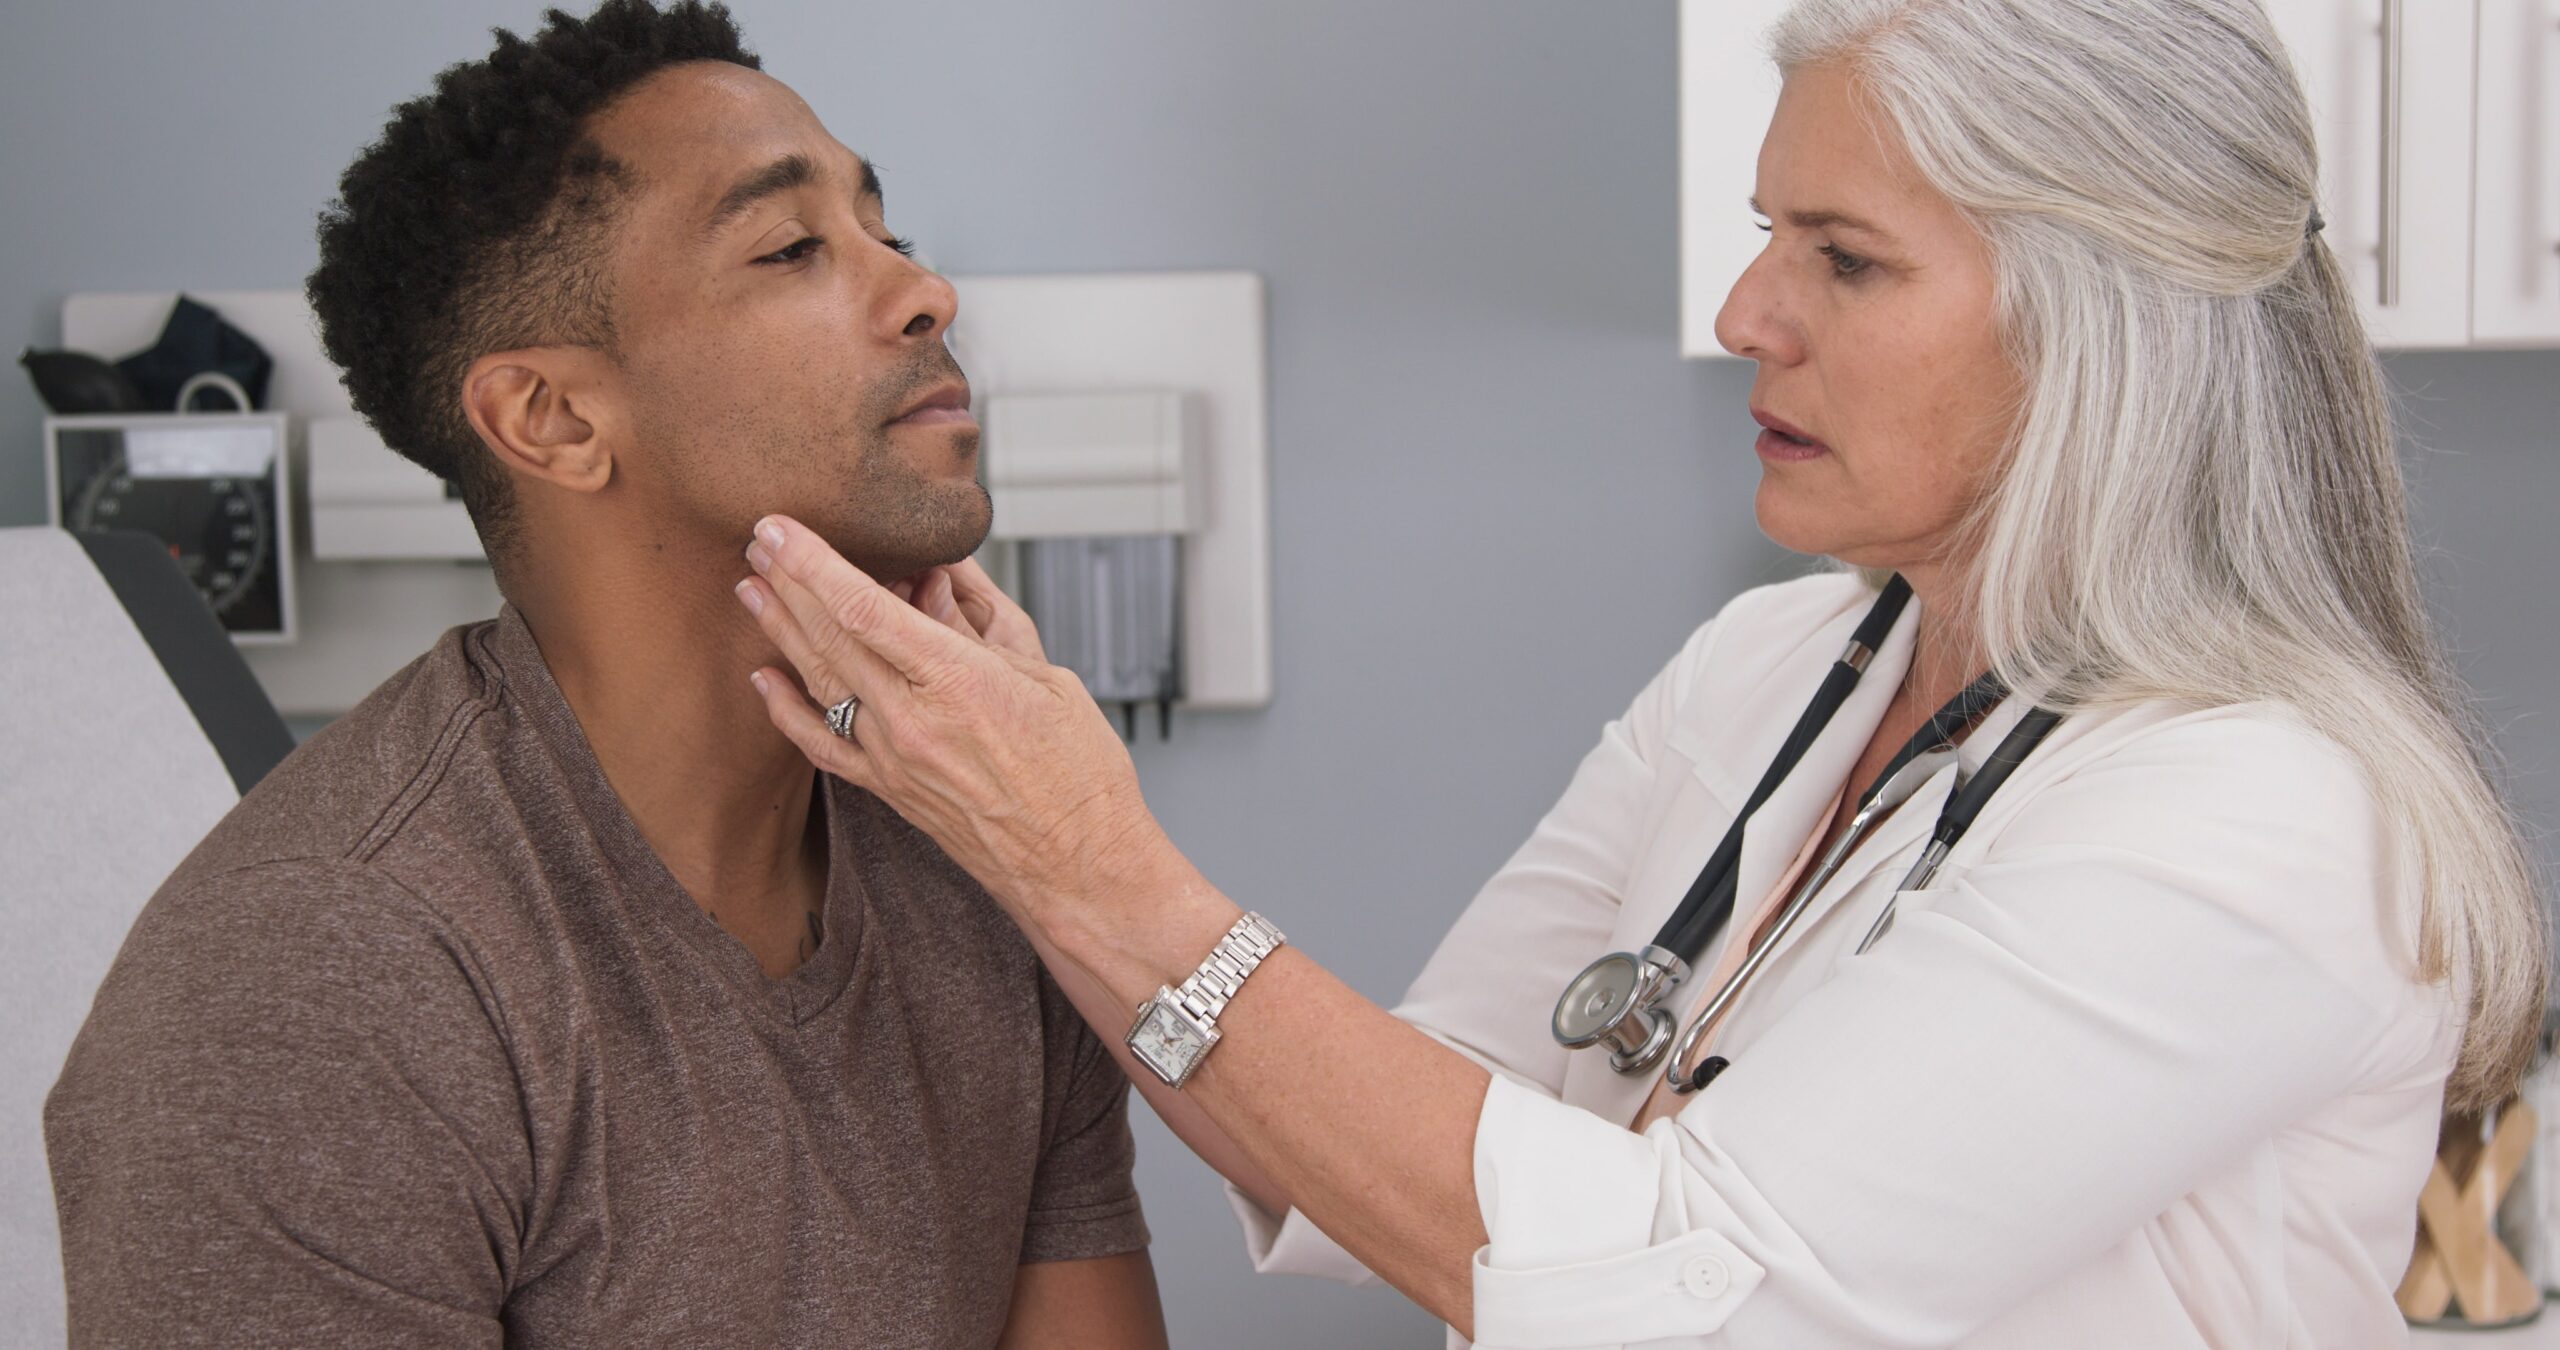 A female doctor checks the lymph nodes in the neck of a male patient.